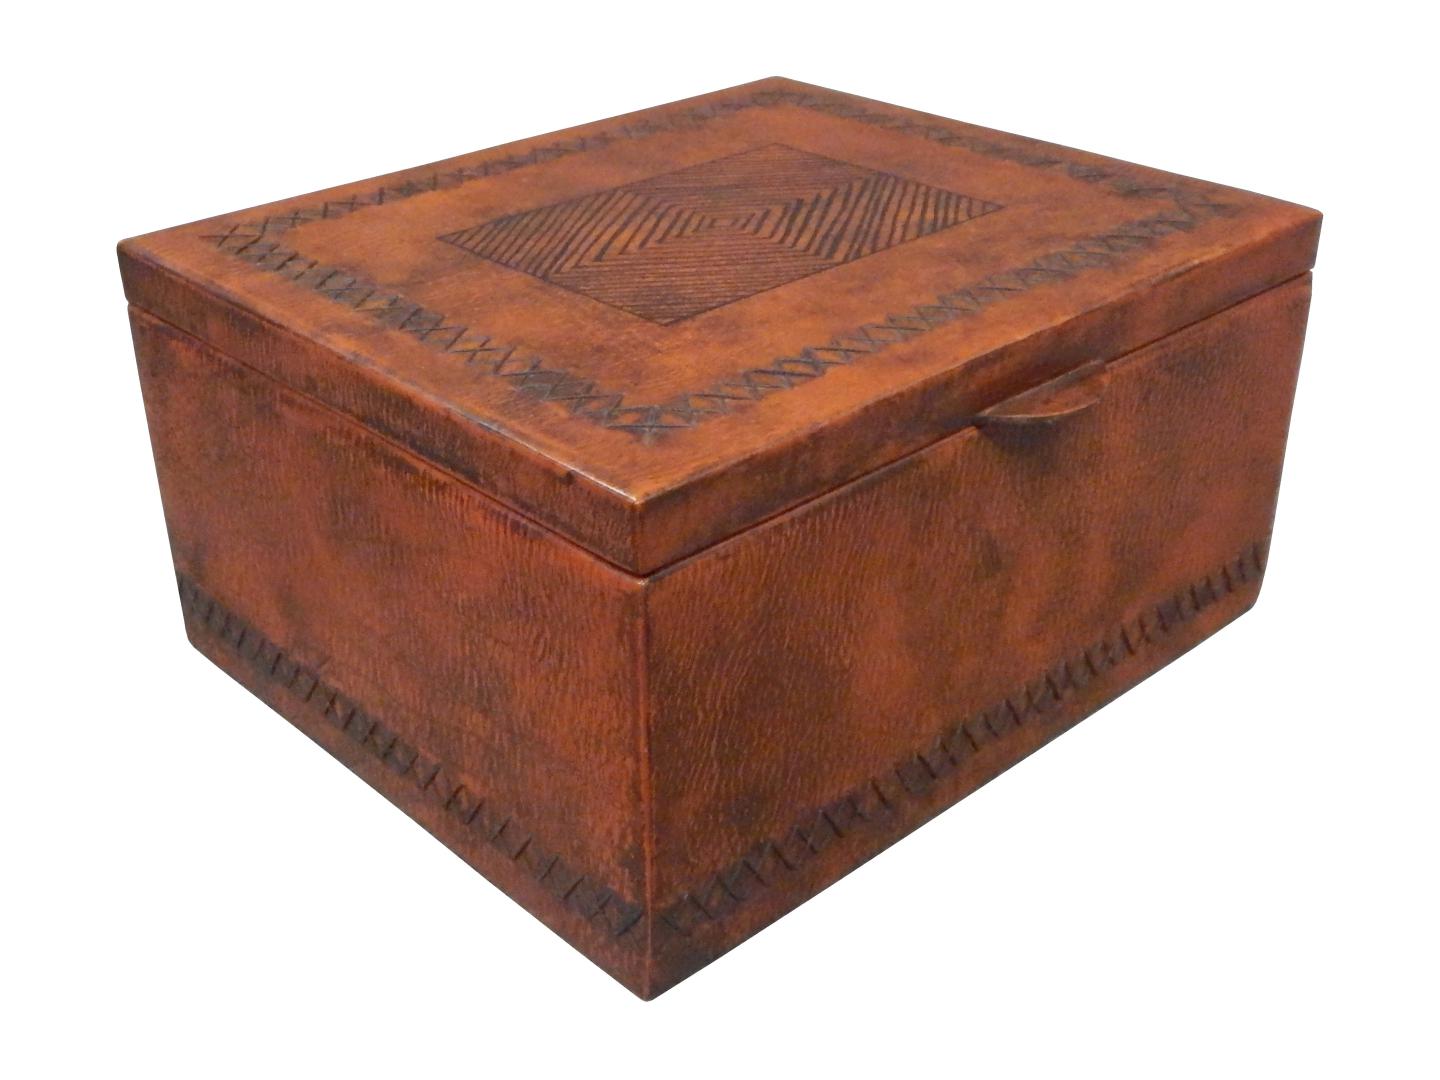 leather box with a sewed around the box and a tribal design on top